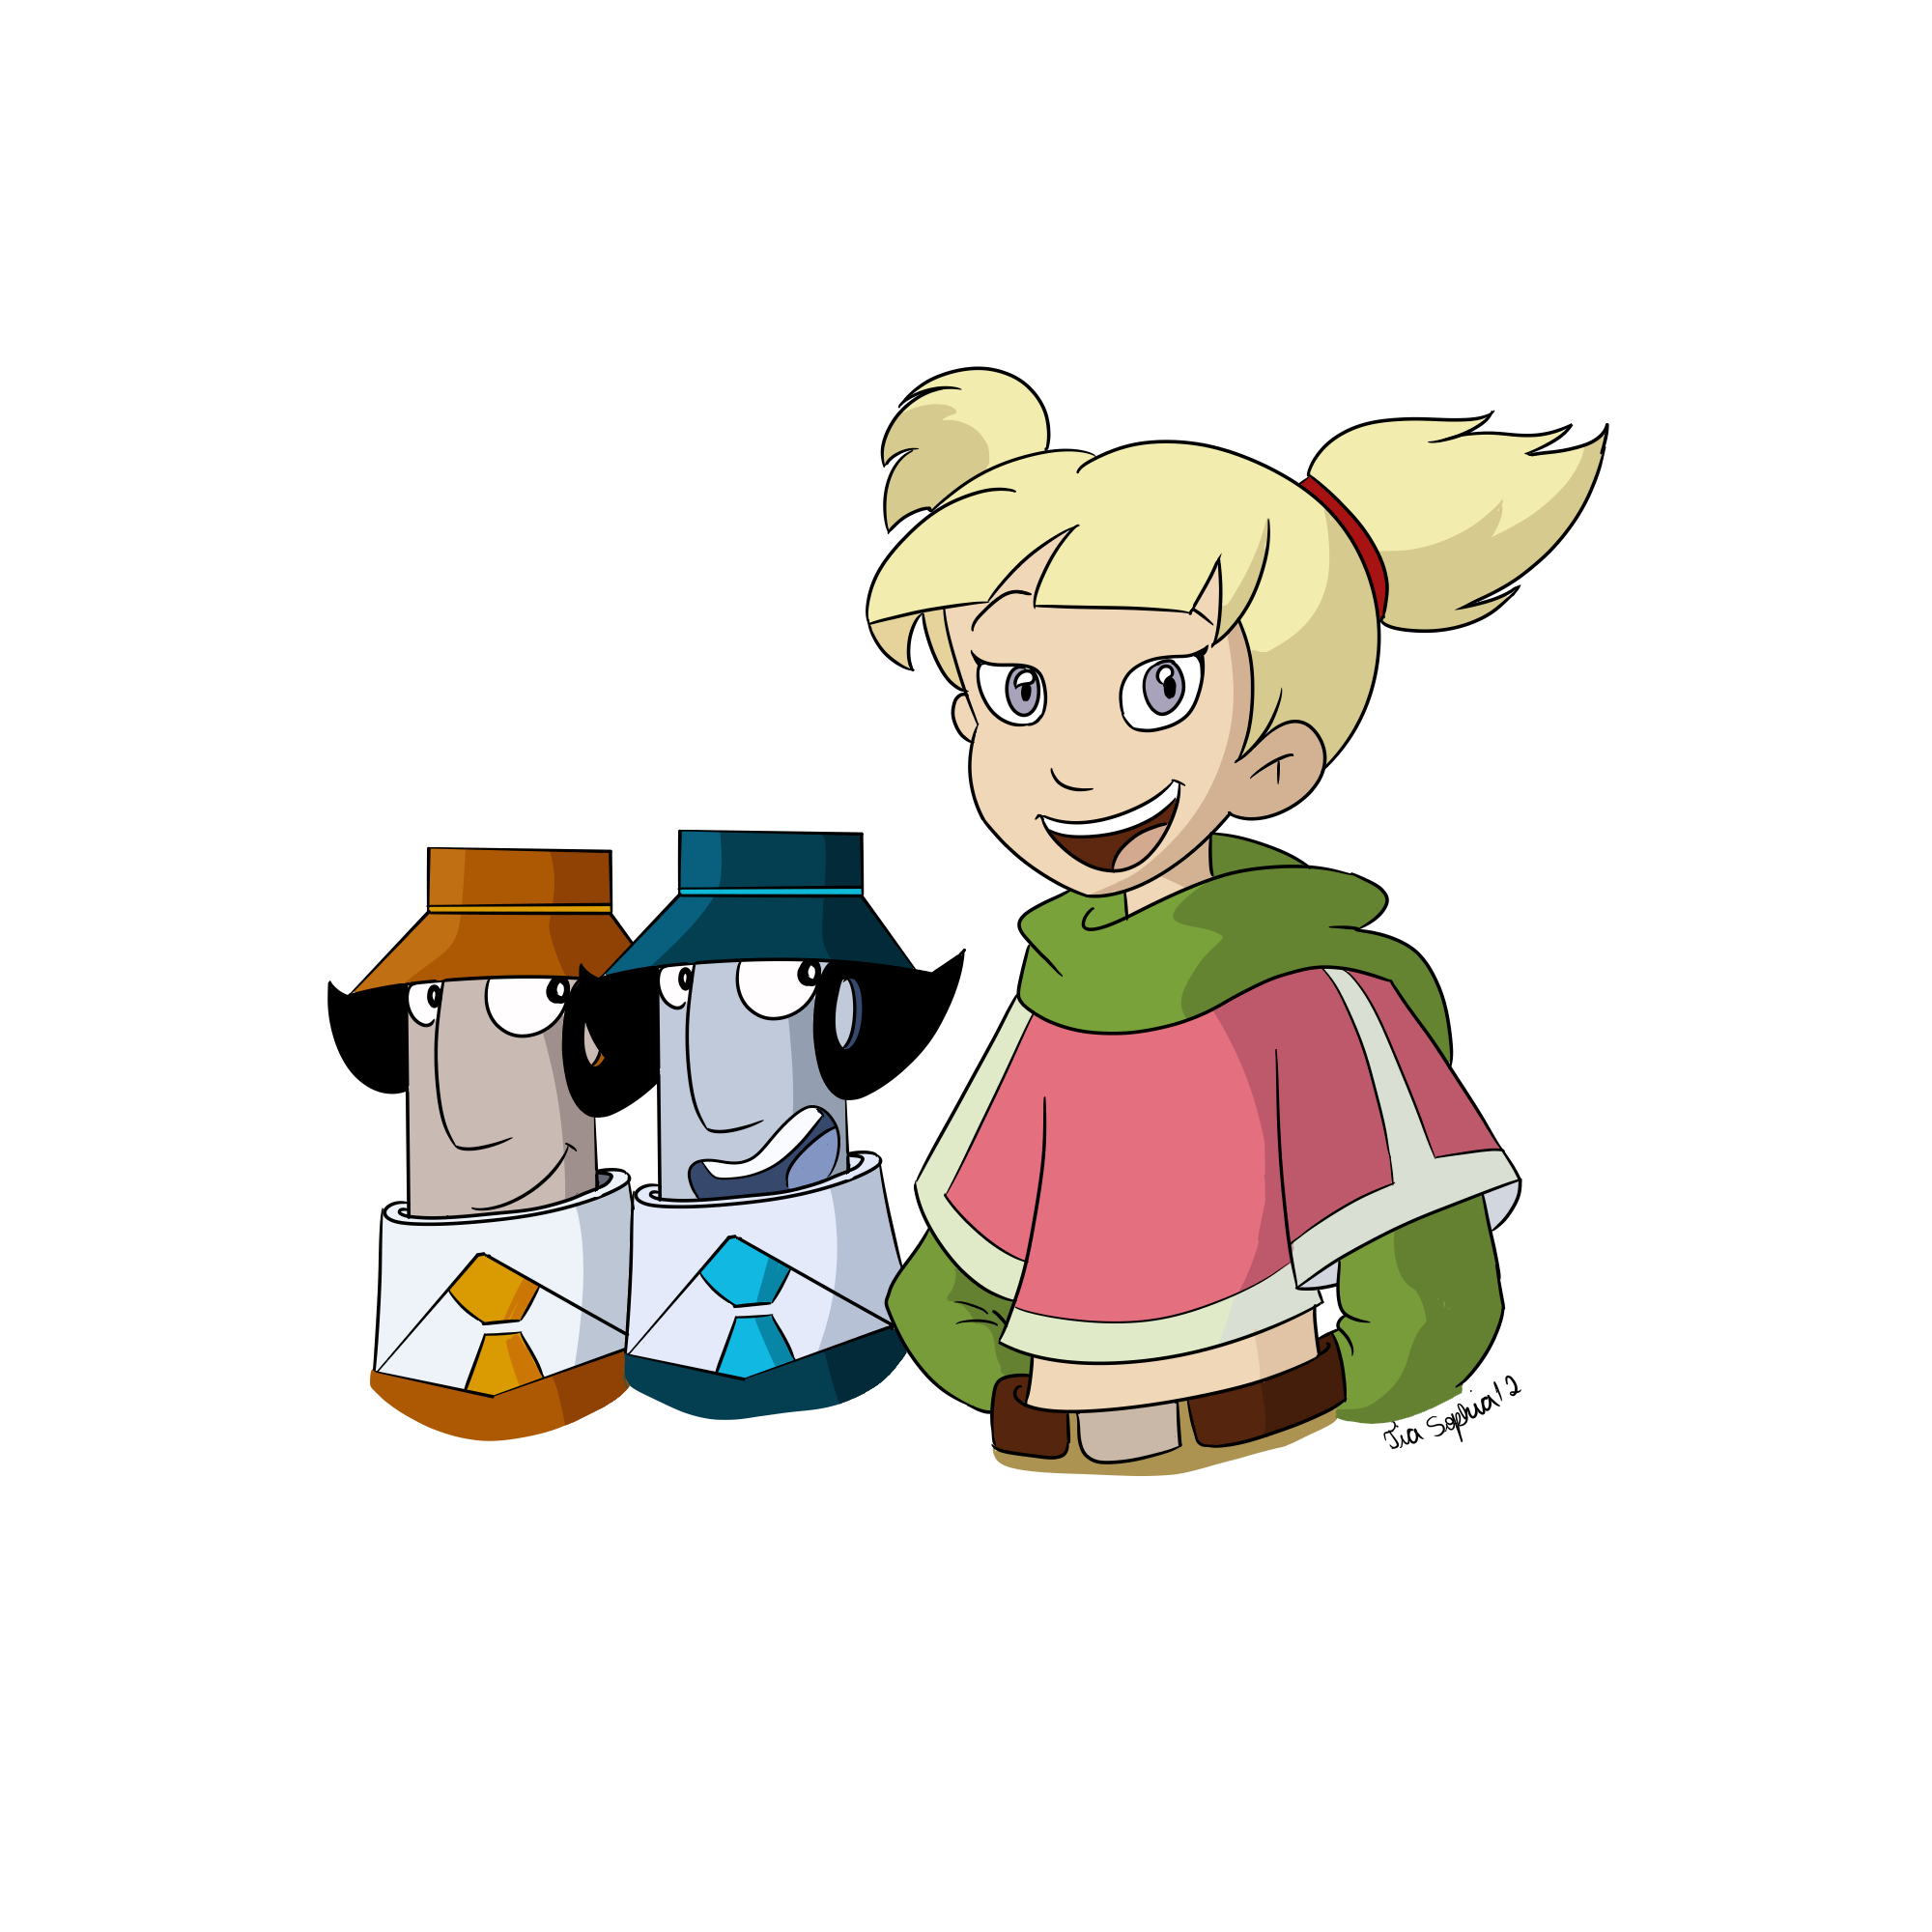 Gadget and the Gadgetinis-Penny, Fidget and Digit by TreeGreen12 on